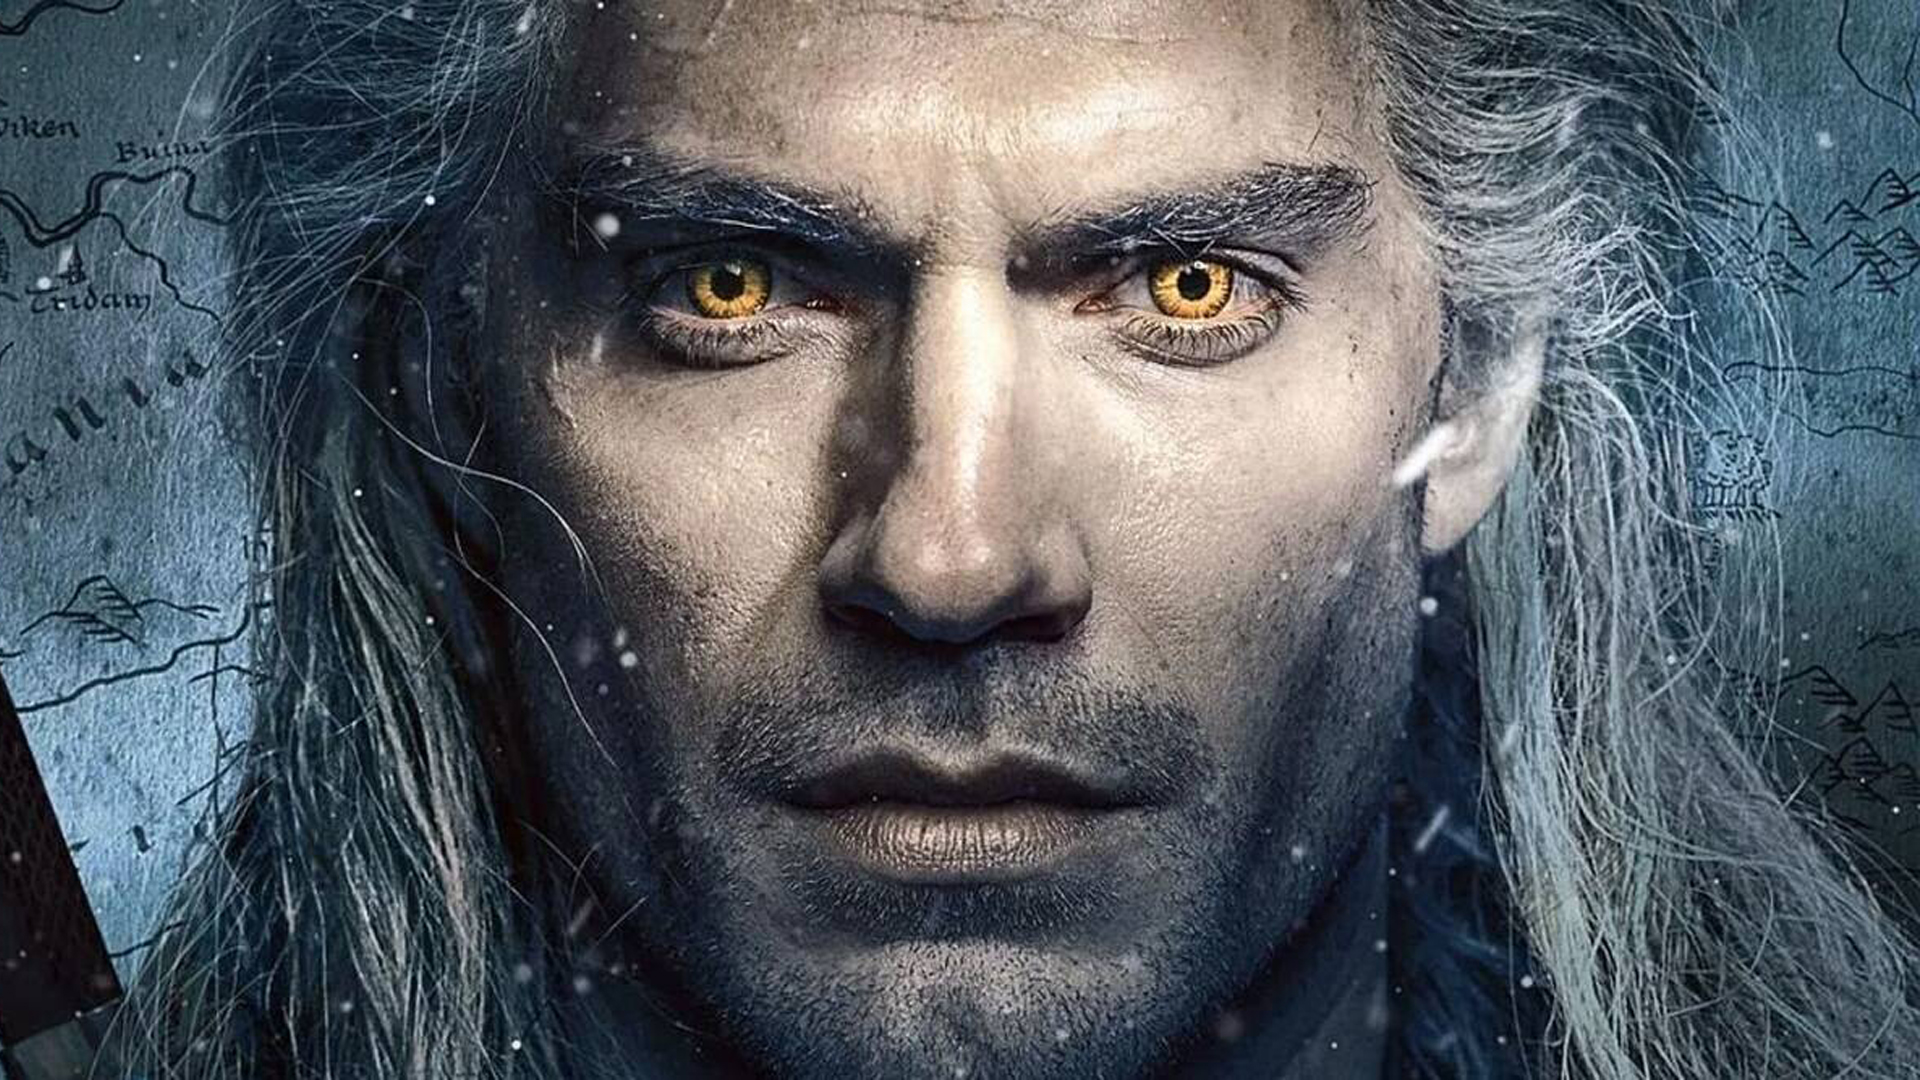 The Witcher Season 3 release date